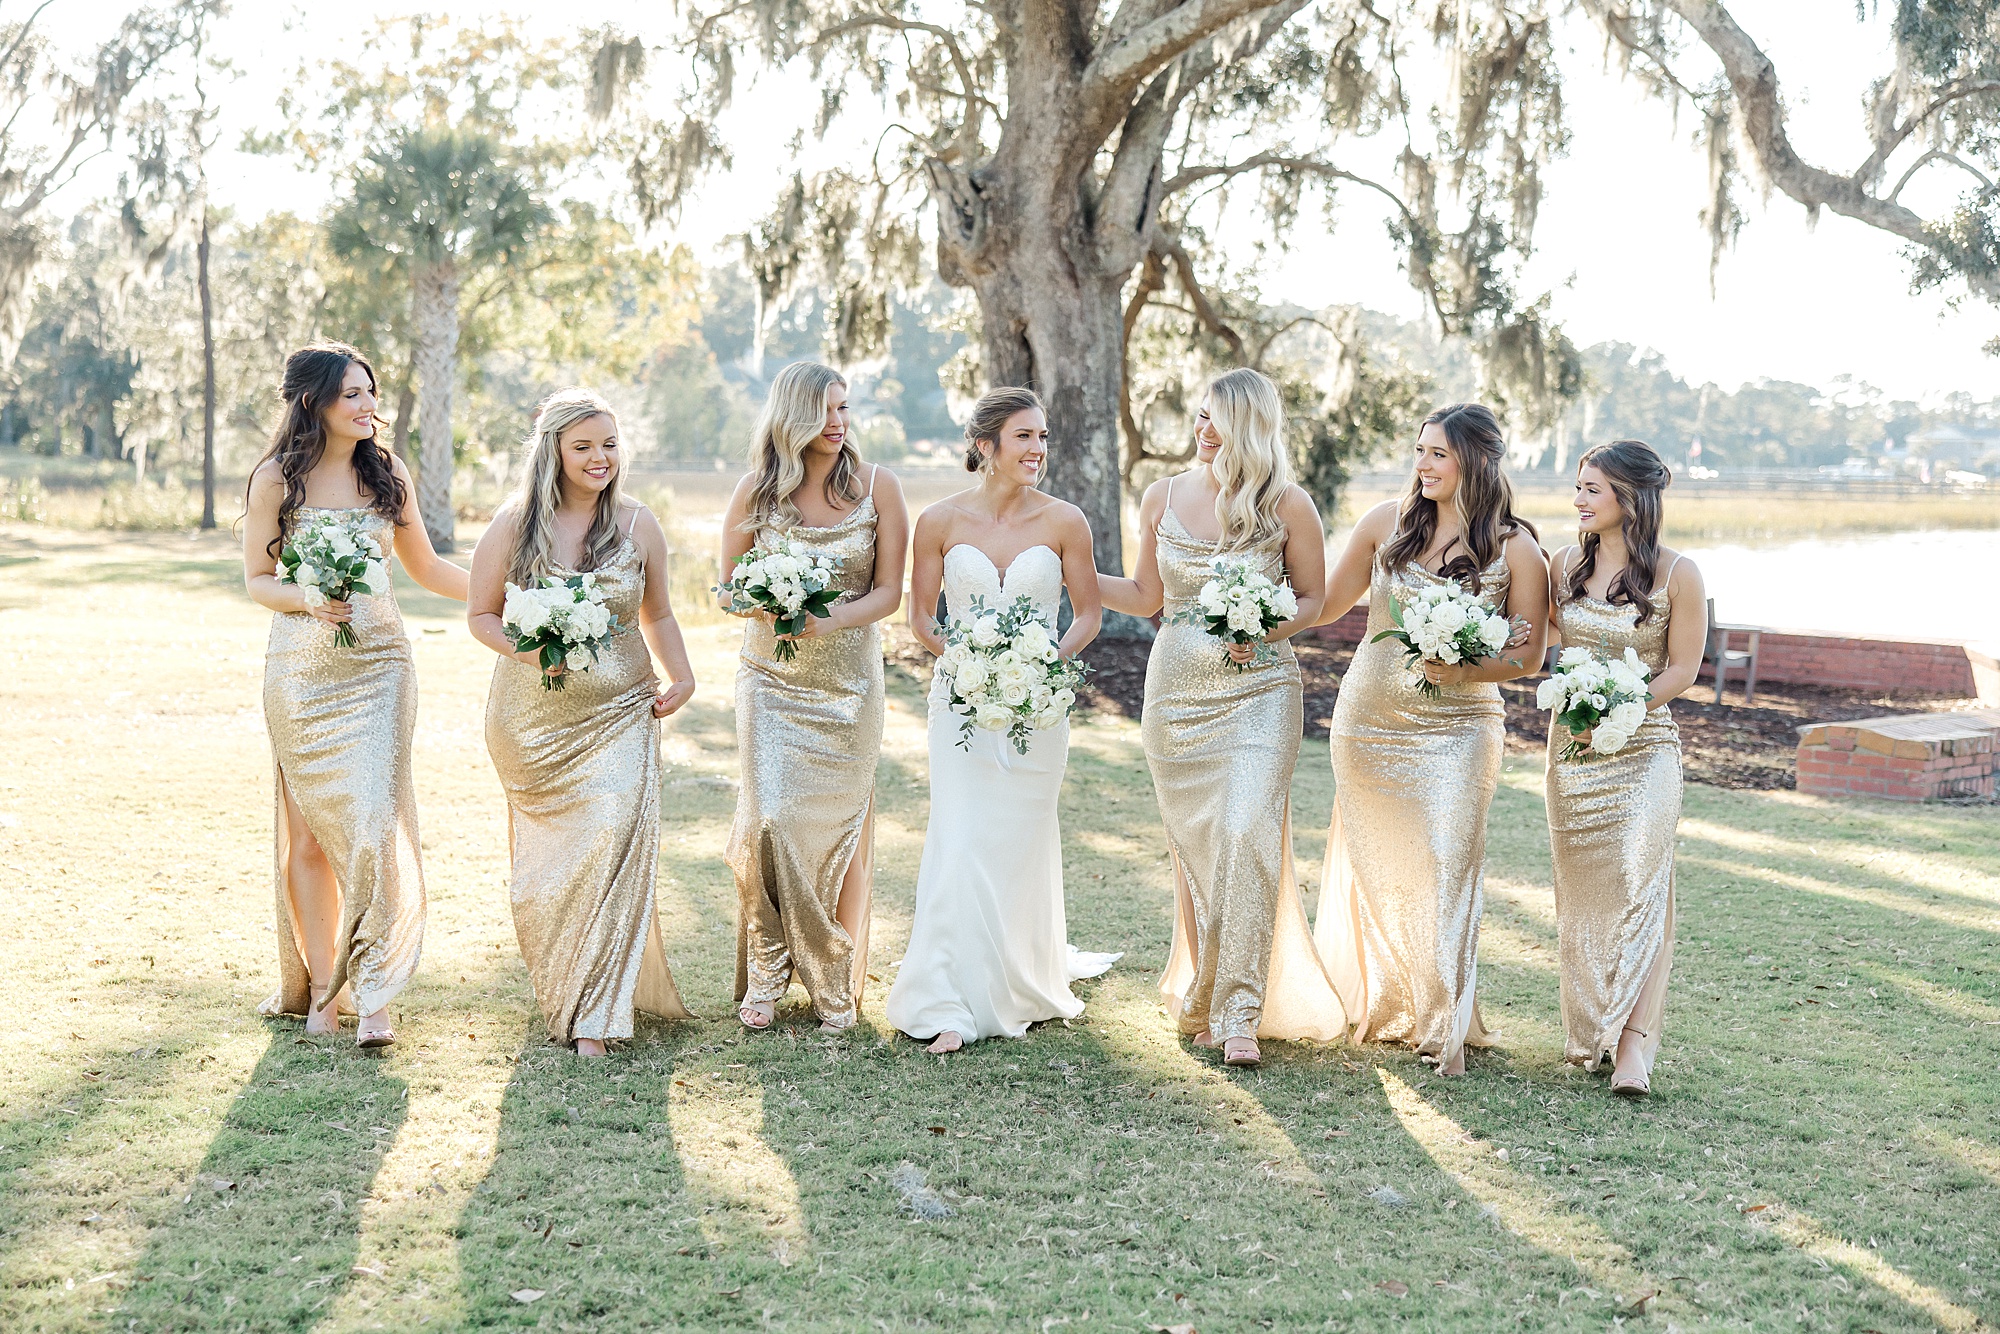 classic white flower bouquets and champagne bridesmaids dresses